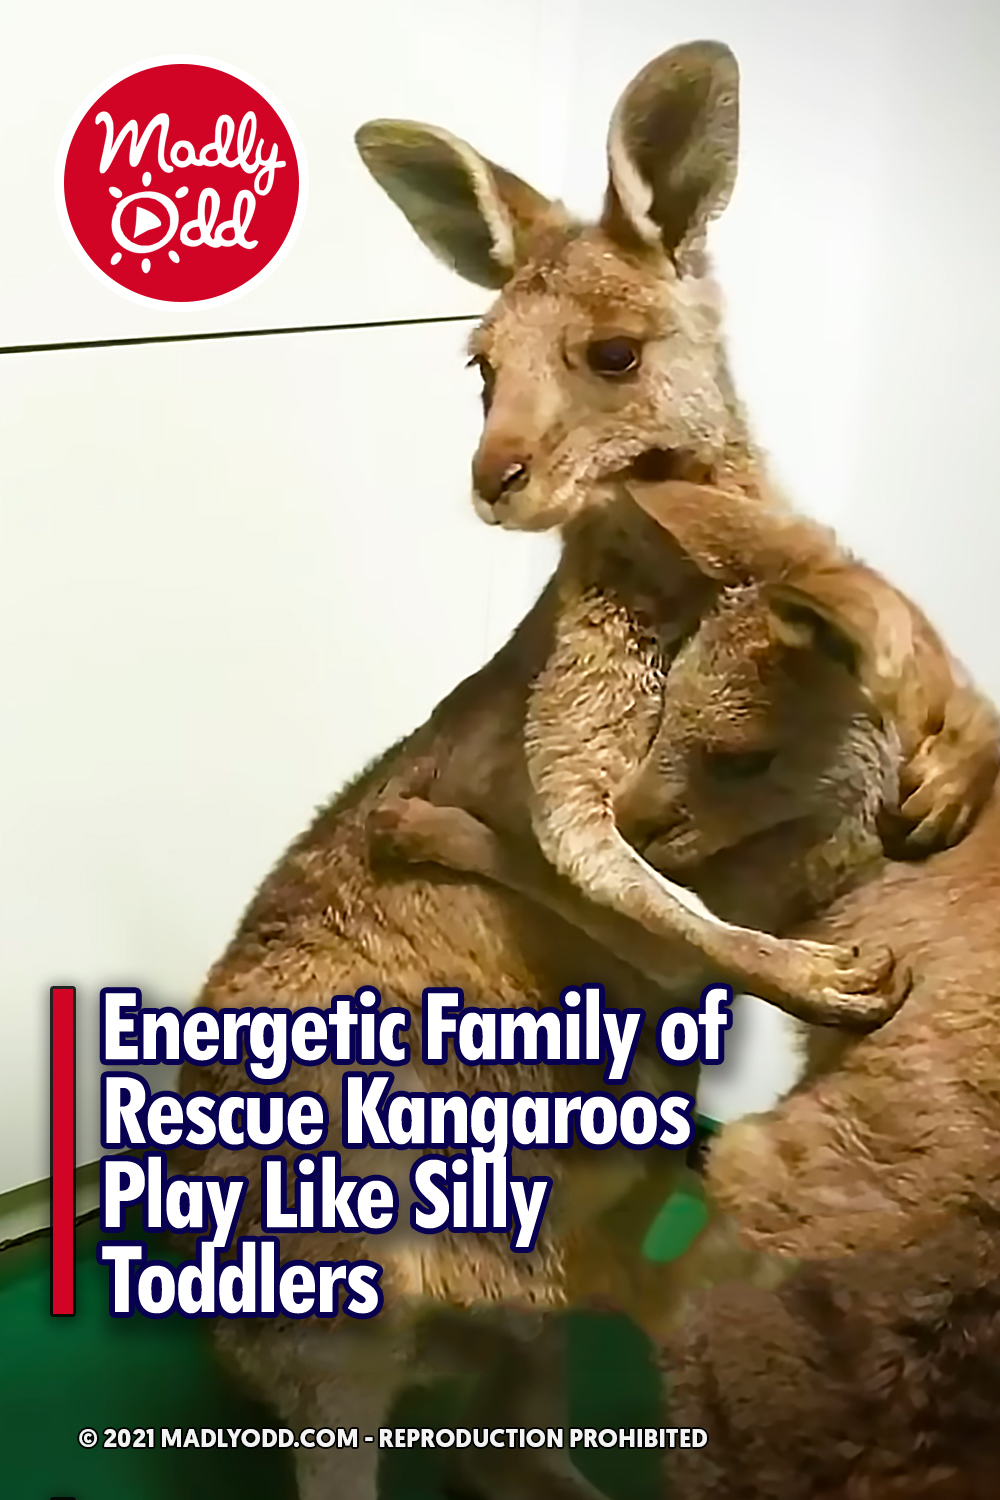 Energetic Family of Rescue Kangaroos Play Like Silly Toddlers